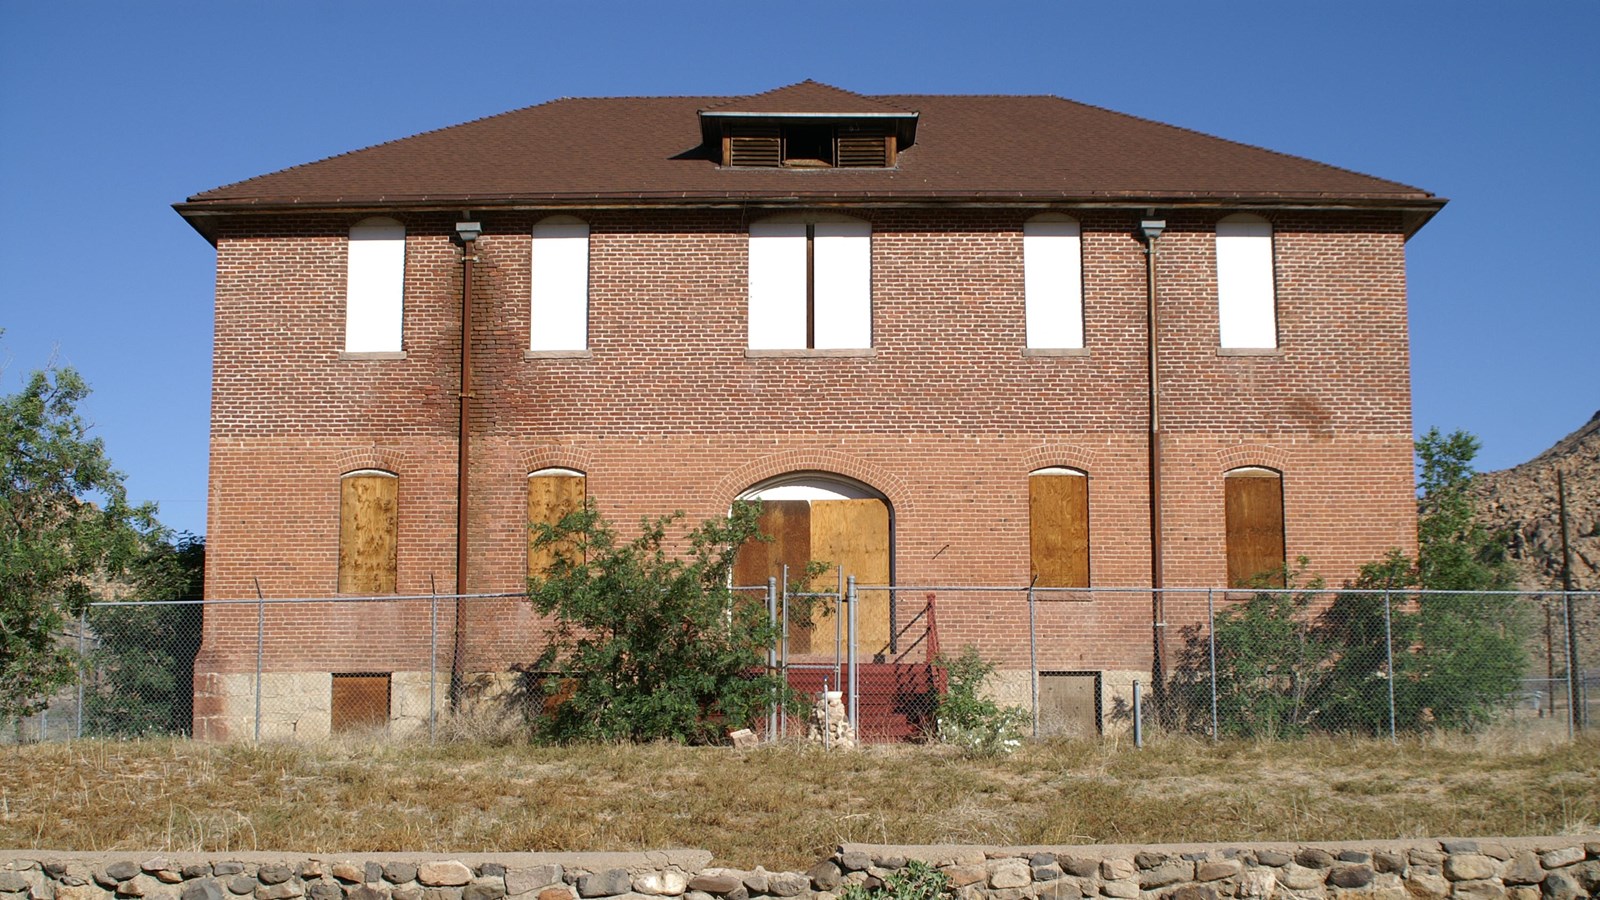 A large two story red brick building with a brown roof and boarded up windows